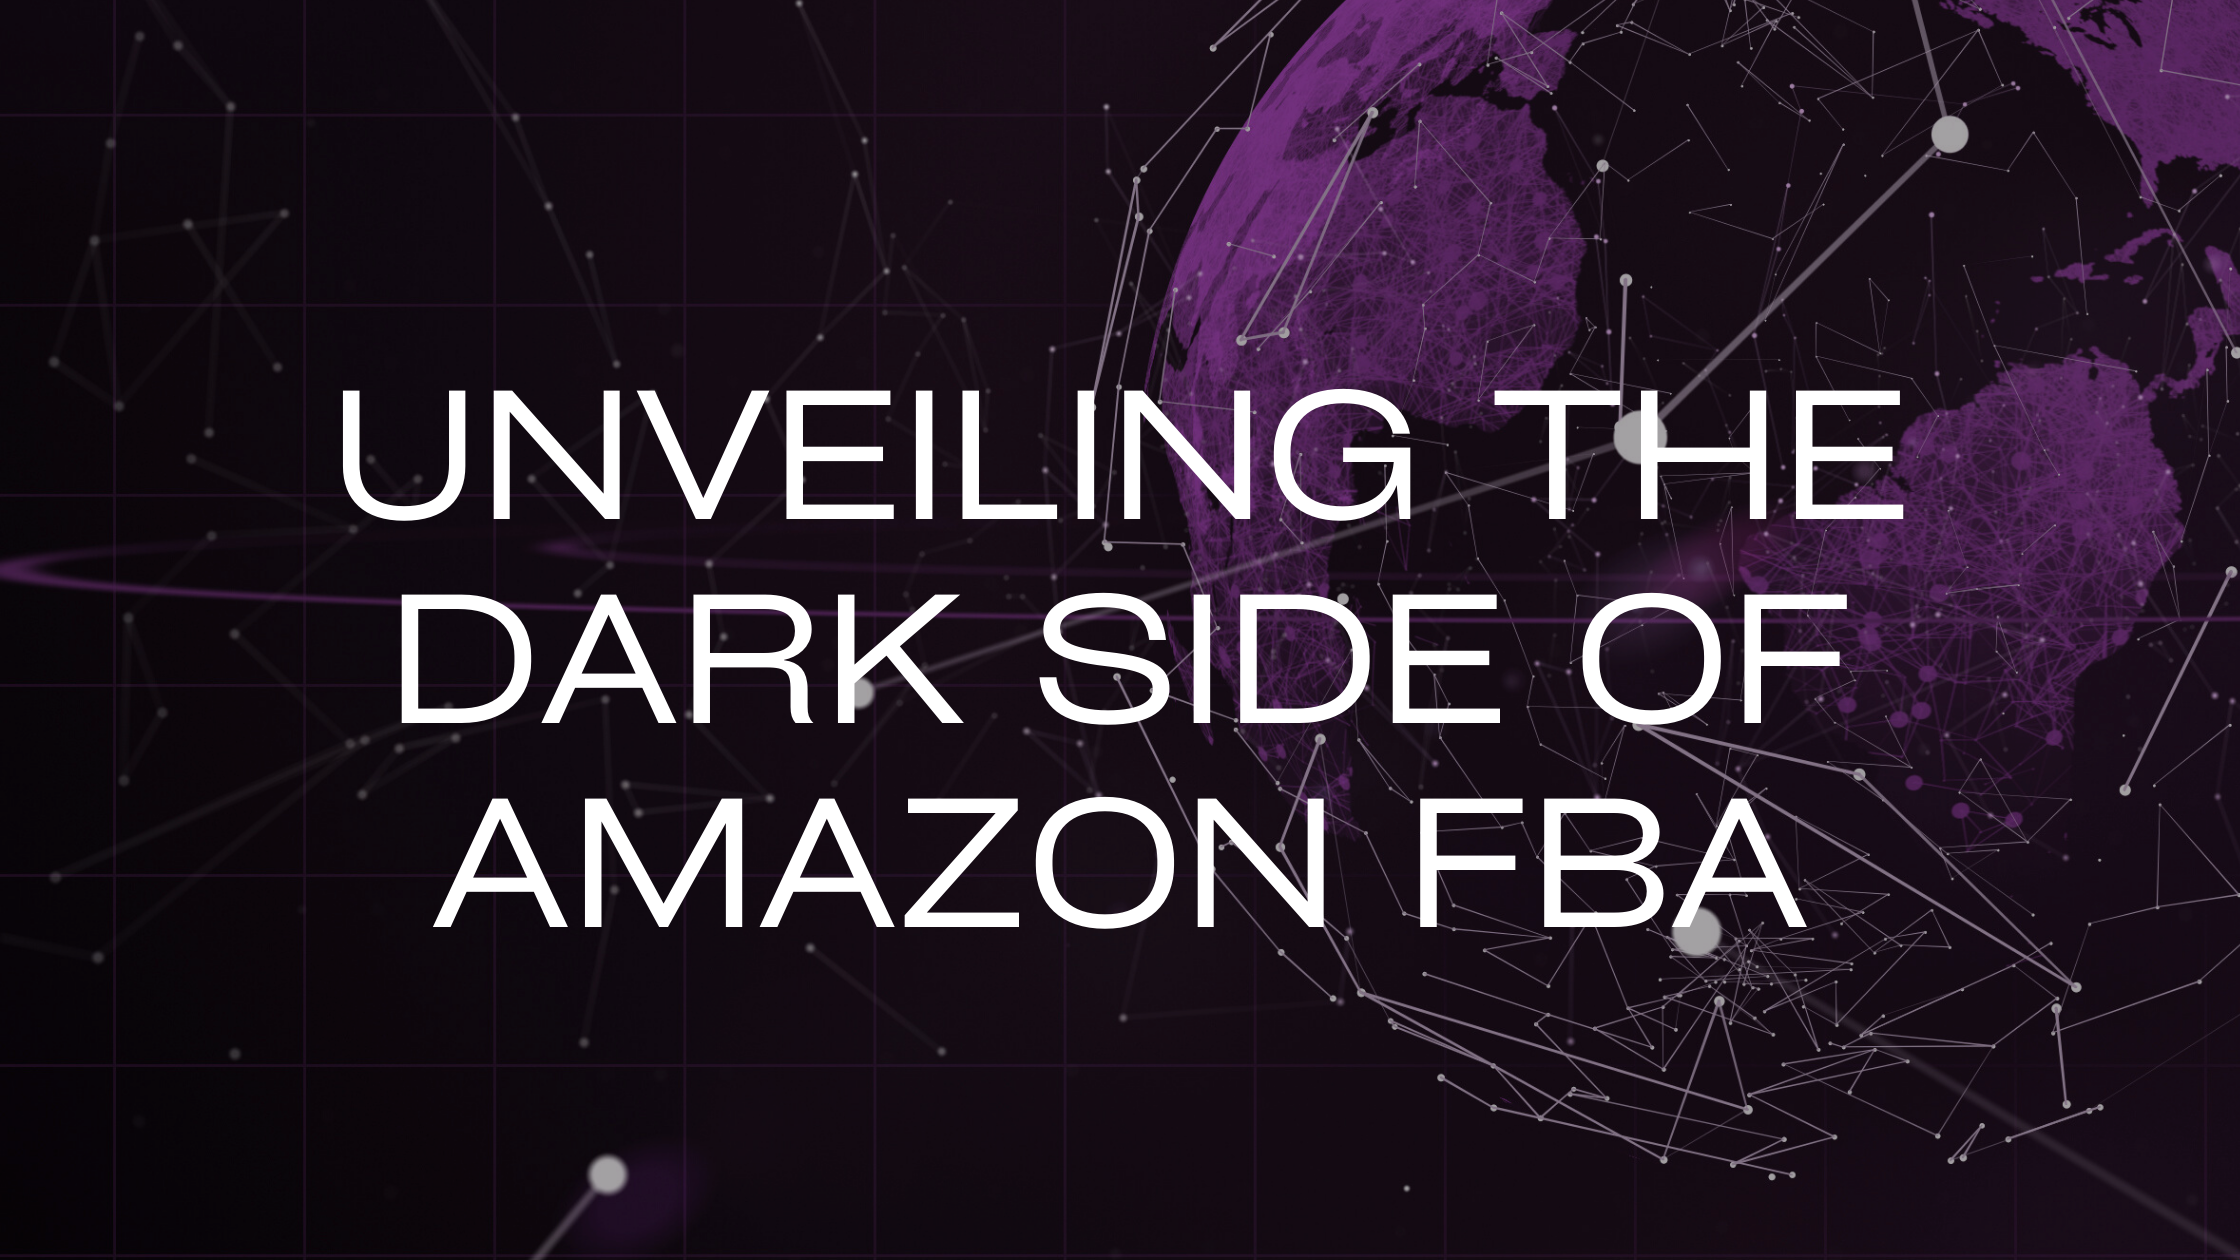 Unveiling the Dark Side of Amazon FBA: 3 Business Killers You Shouldn’t Ignore